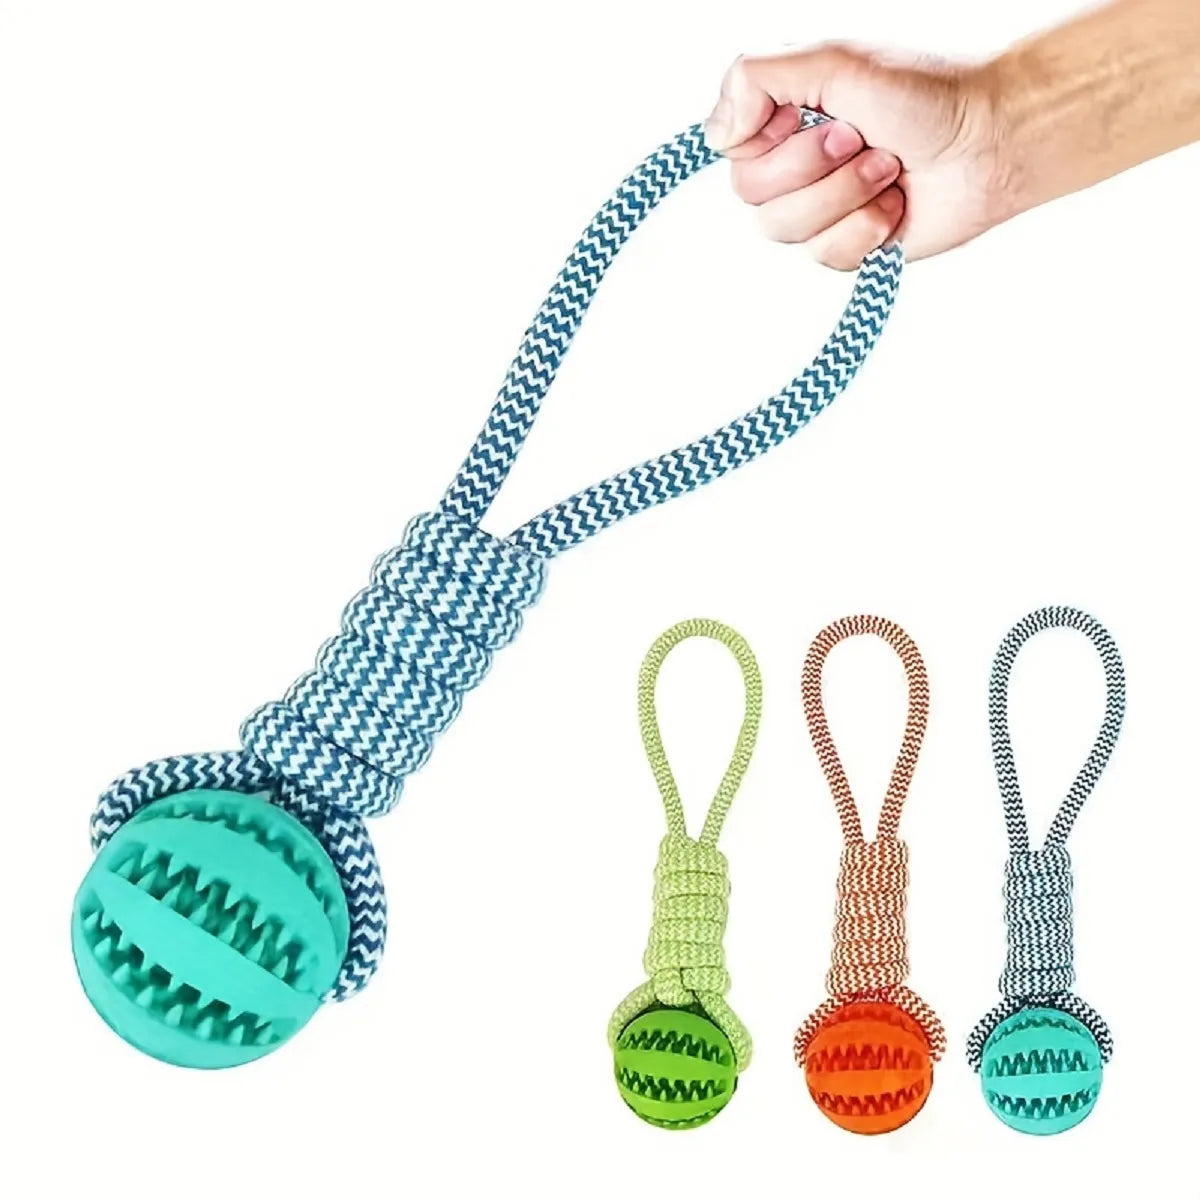 Interactive Dog Toy: Engaging Treat Dispensing Balls for Small to Medium Dogs  ourlum.com   